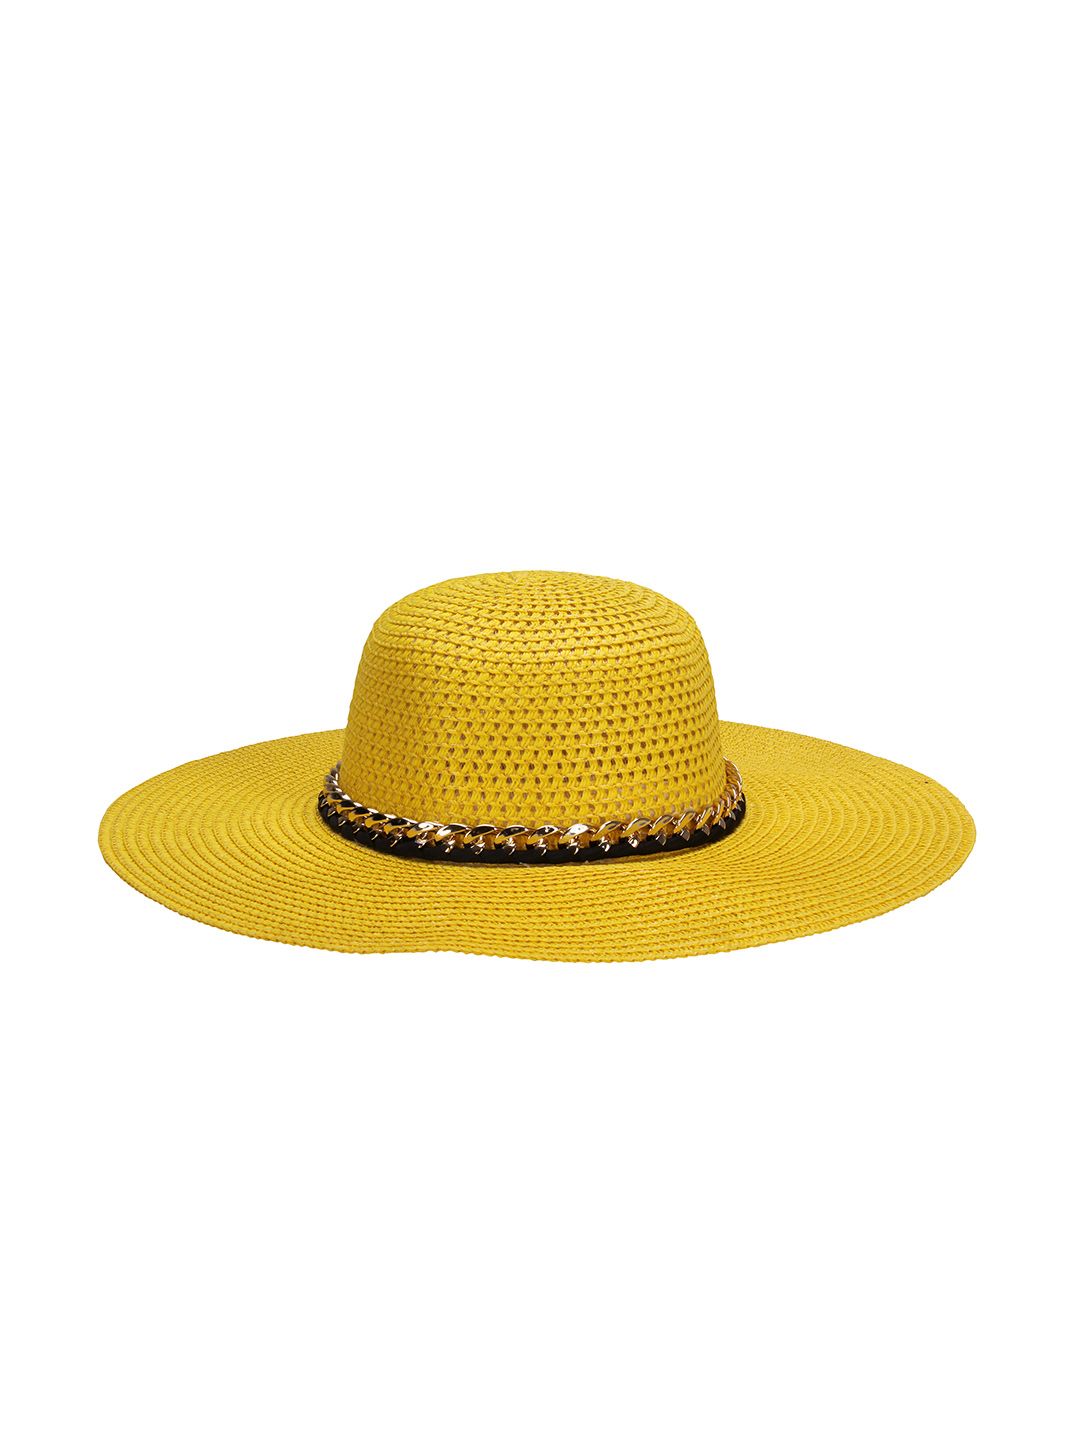 FabSeasons Women Yellow Patterned Sun Hat Price in India